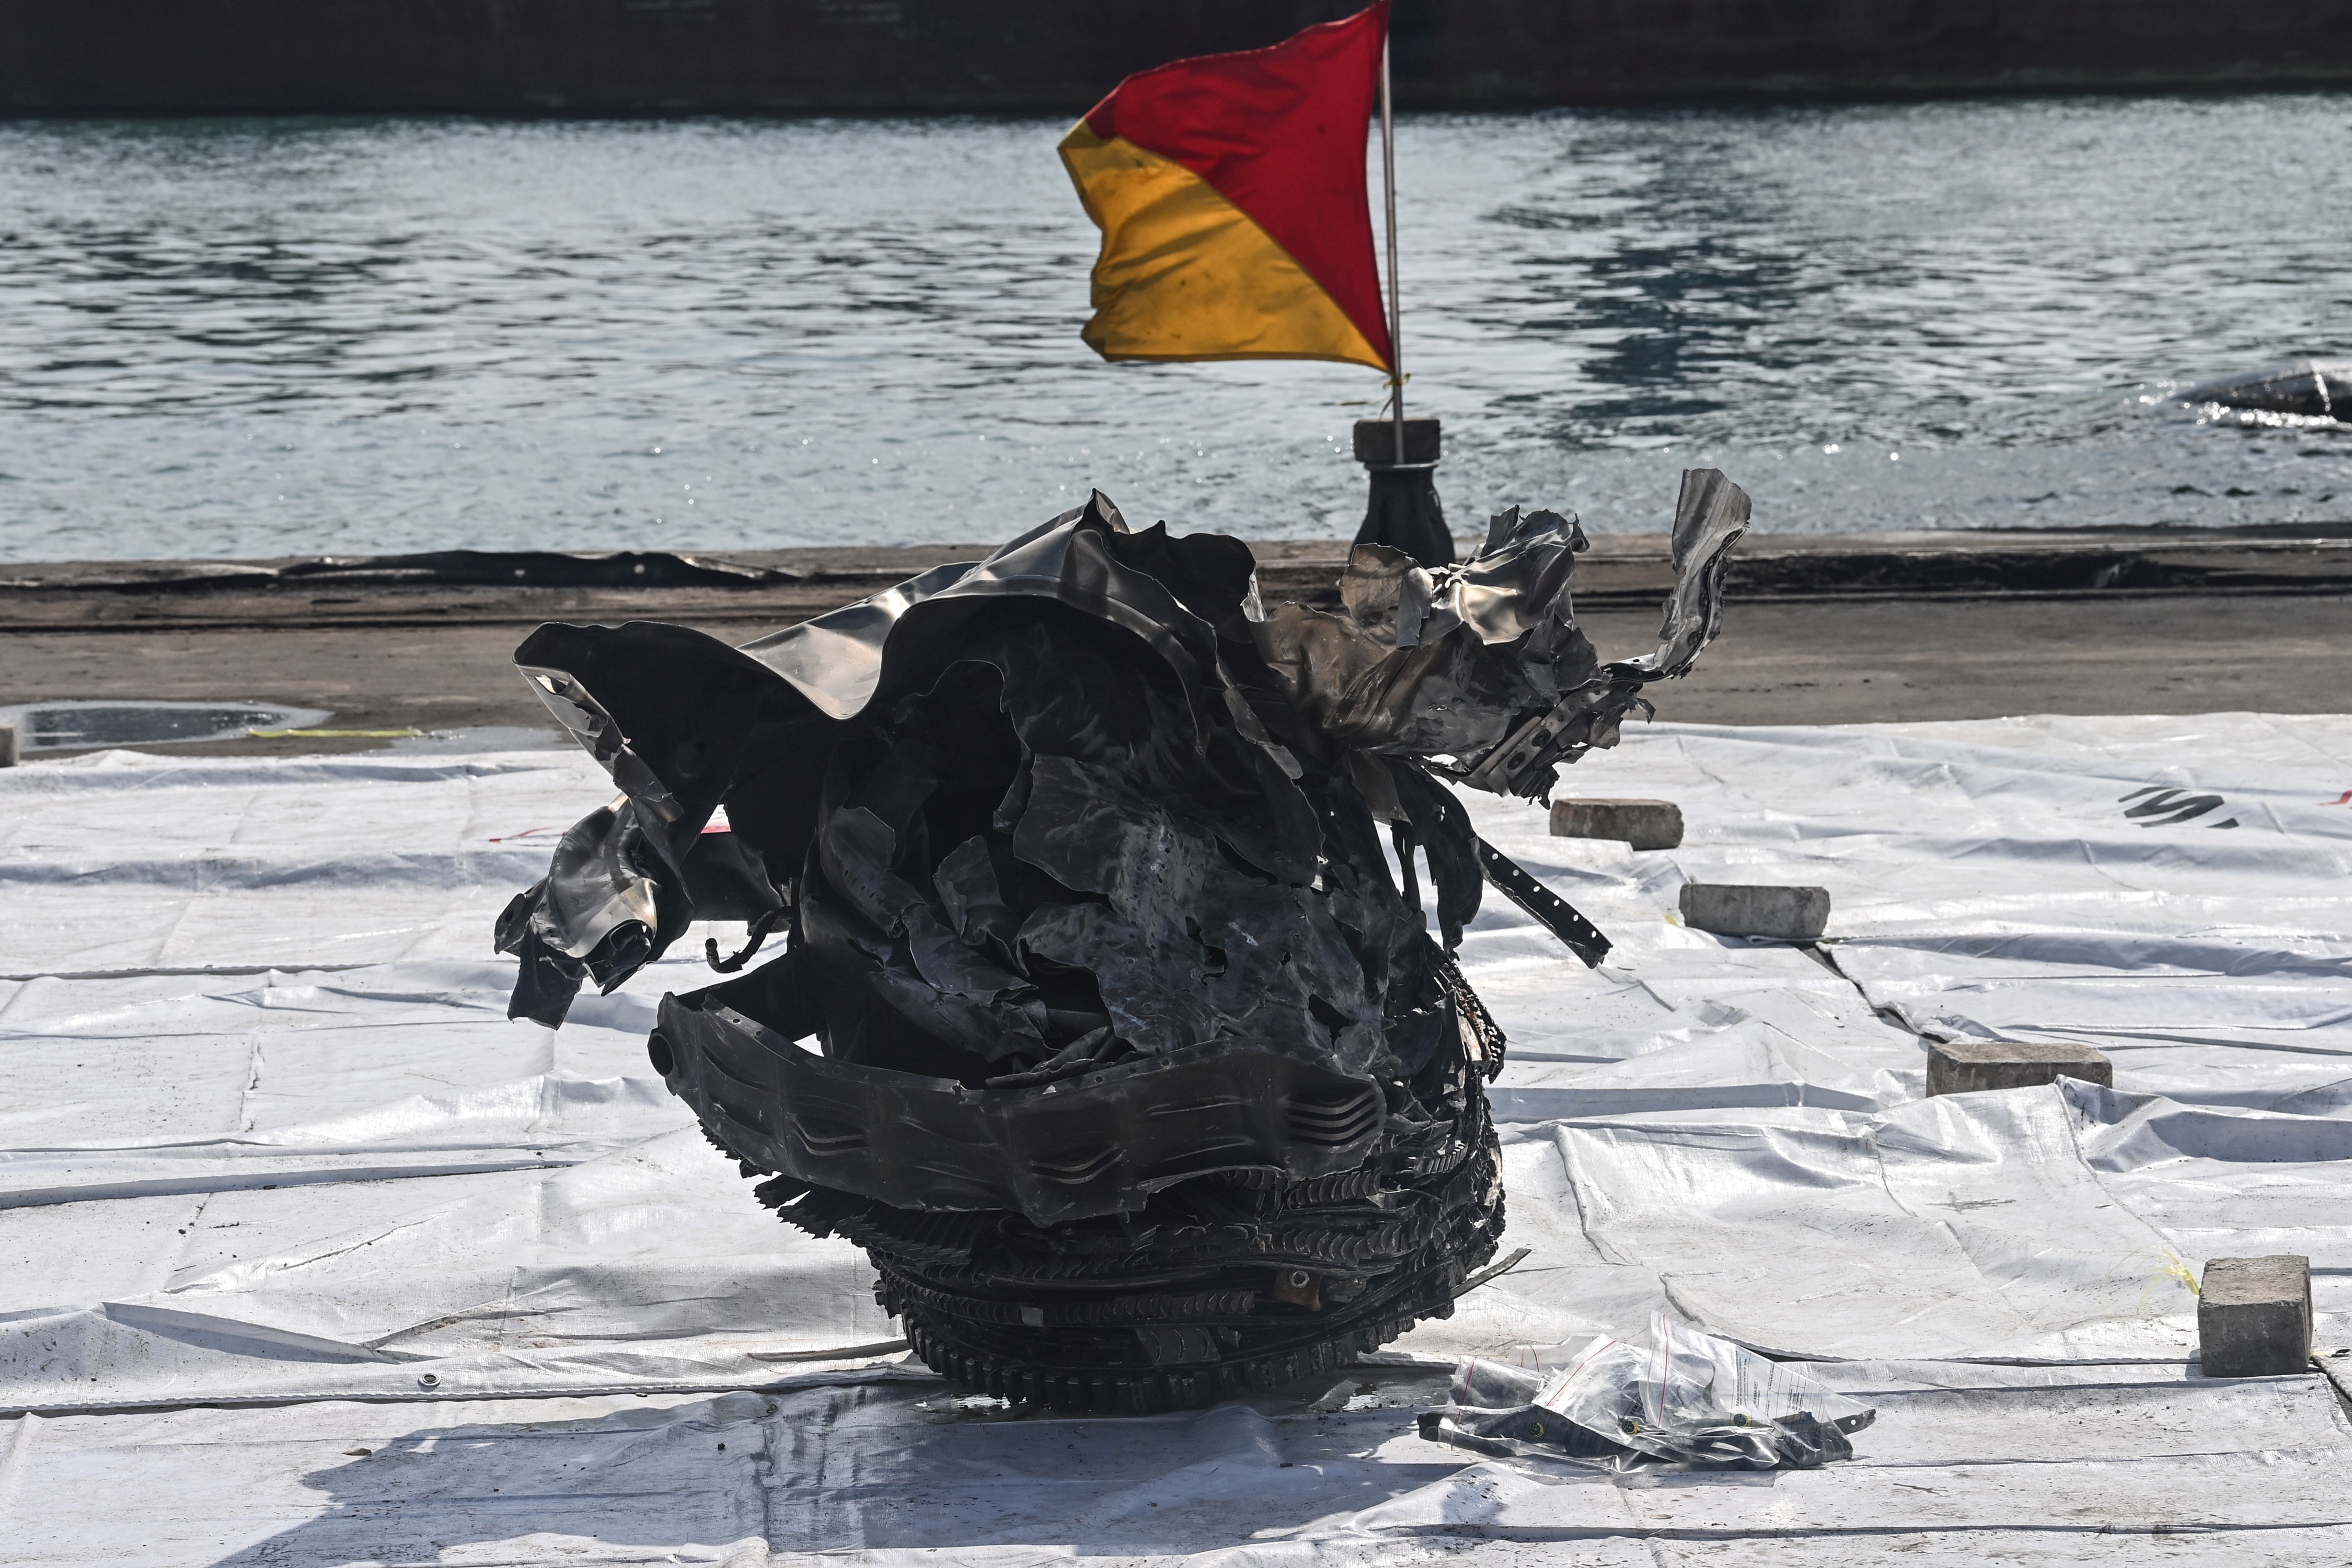 A piece of wreckage recovered at sea. (AFP PHOTO BY ADEK BERRY)